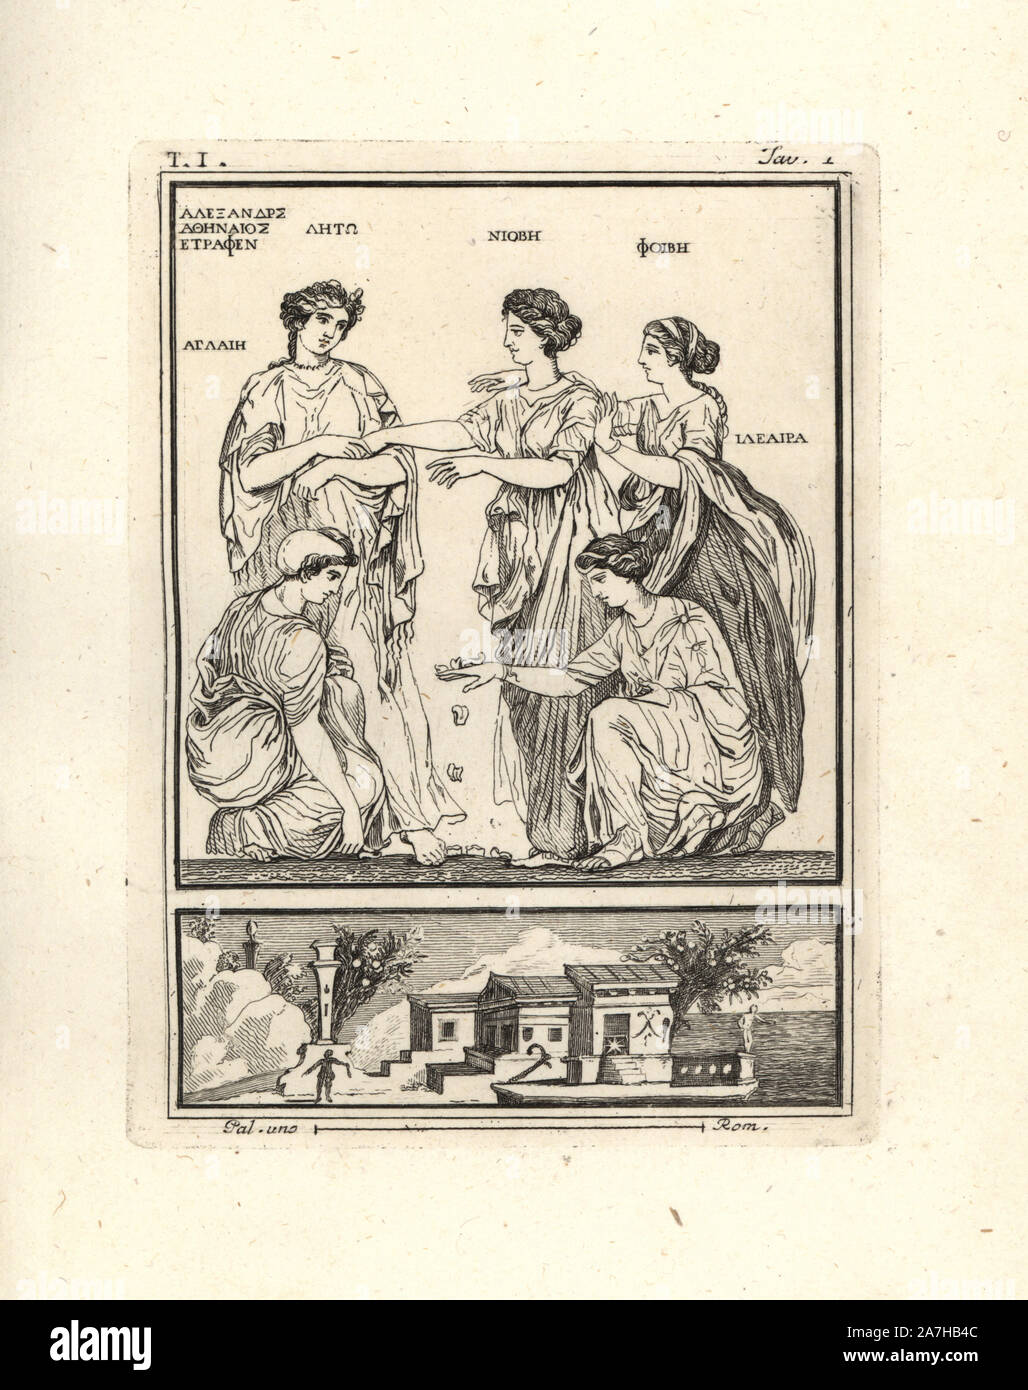 The Roman goddesses Latona, Niobe, Phoebe, Aglaia (the youngest of the three Graces) and Hileaera, the latter two playing a game of  astragali or knucklebones. Painting on marble by Alexander the Athenian discovered in Resina in May 1786. Copperplate engraved by Tommaso Piroli from his own 'Antichita di Ercolano' (Antiquities of Herculaneum), Rome, 1789.  Italian artist and engraver Piroli (1752-1824) published six volumes between 1789 and 1807 documenting the murals and bronzes found in Heraculaneum and Pompeii. Stock Photo